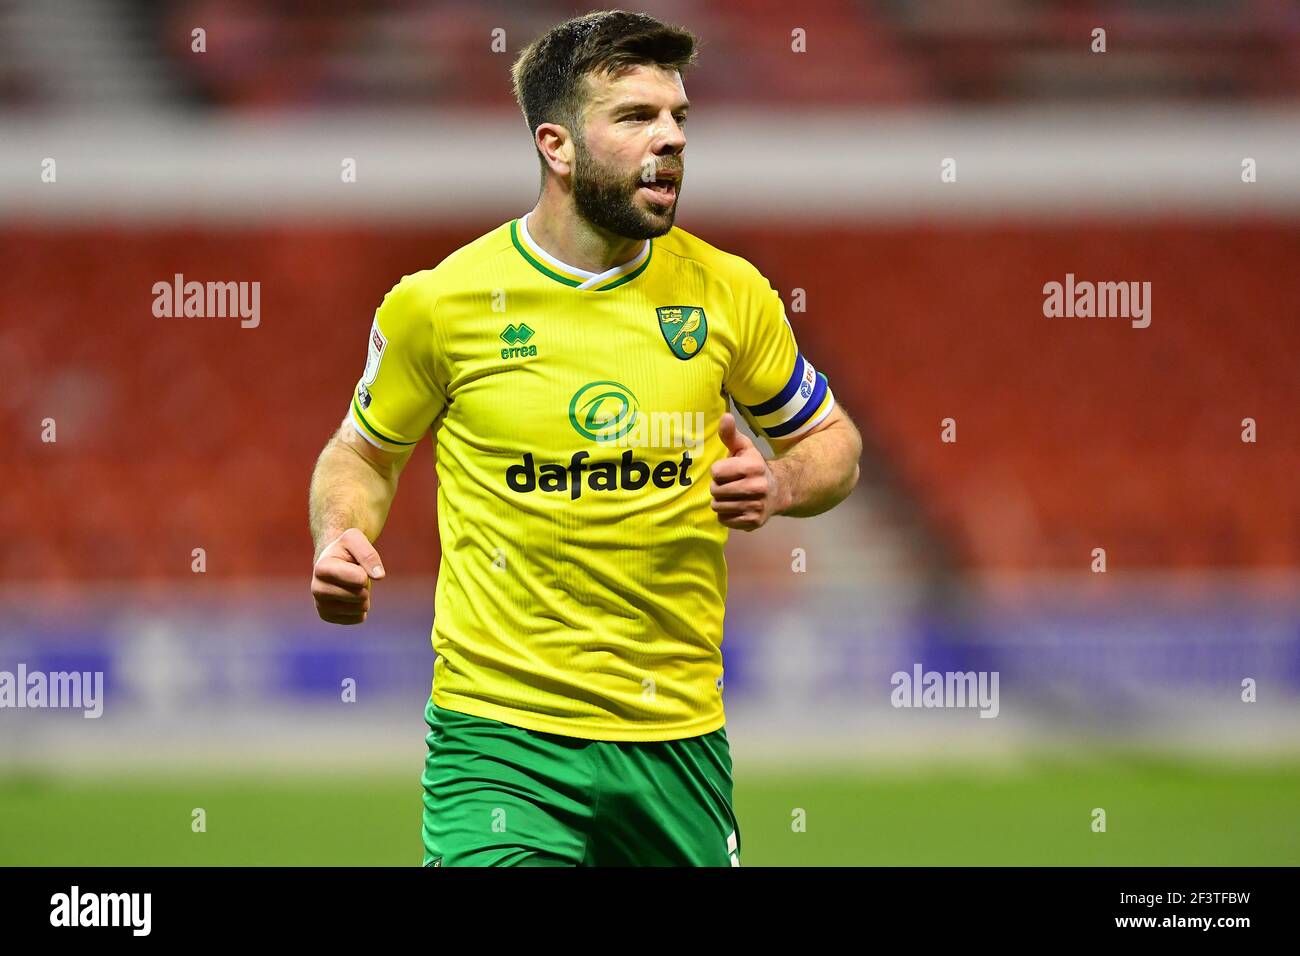 NOTTINGHAM, ENGLAND. MARCH 17TH: Grant Hanley of Norwich City in action during the Sky Bet Championship match between Nottingham Forest and Norwich City at the City Ground, Nottingham on Wednesday 17th March 2021. (Credit: Jon Hobley | MI News) Credit: MI News & Sport /Alamy Live News Stock Photo